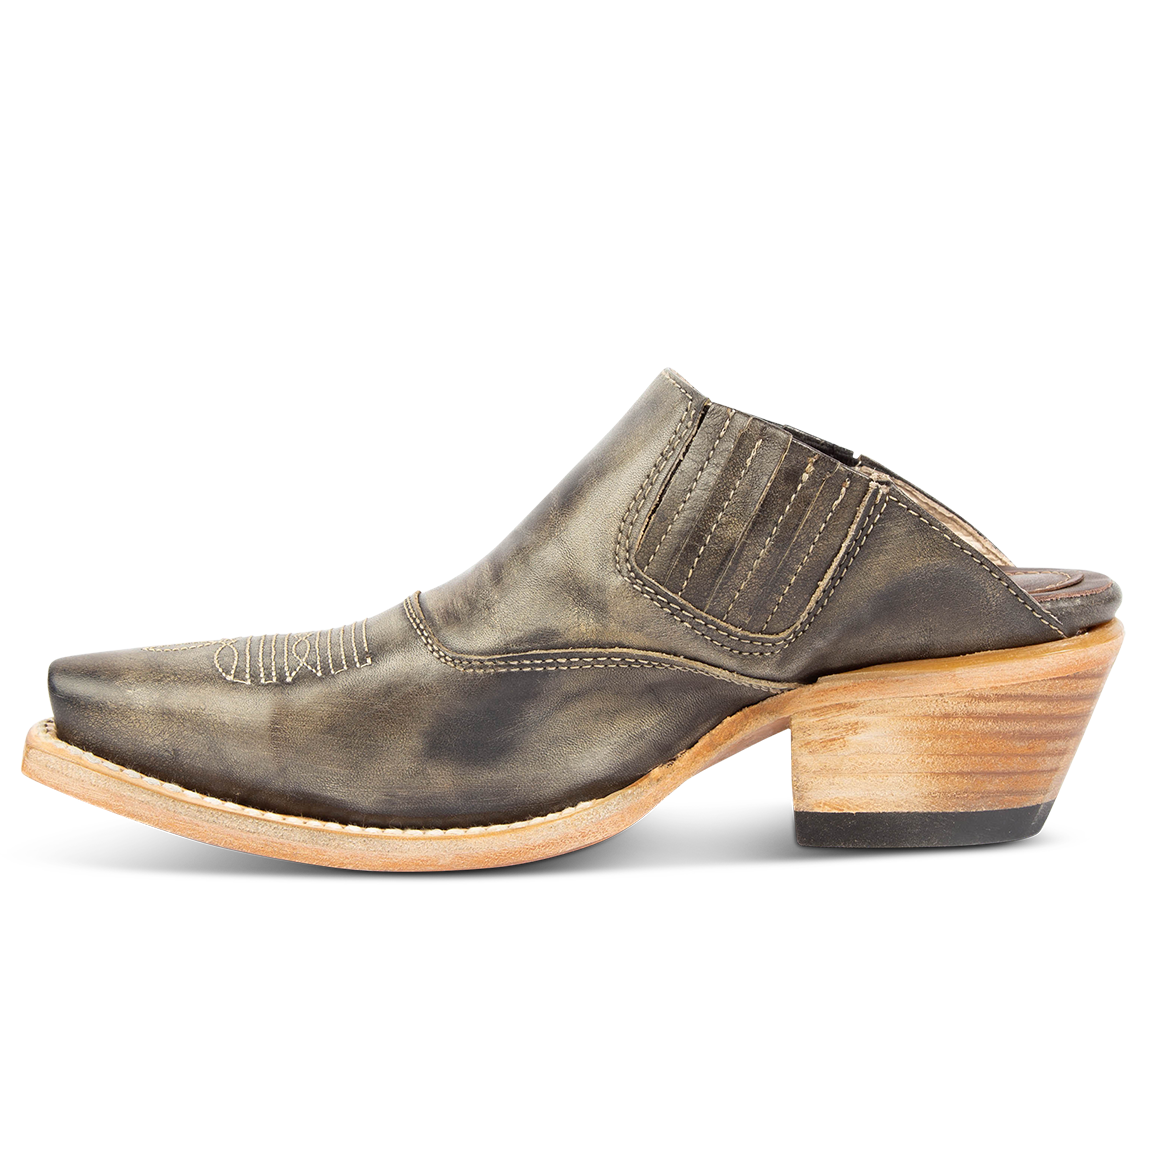 Inside view showing elastic gore and stitching on FREEBIRD women's Wentworth olive western mule